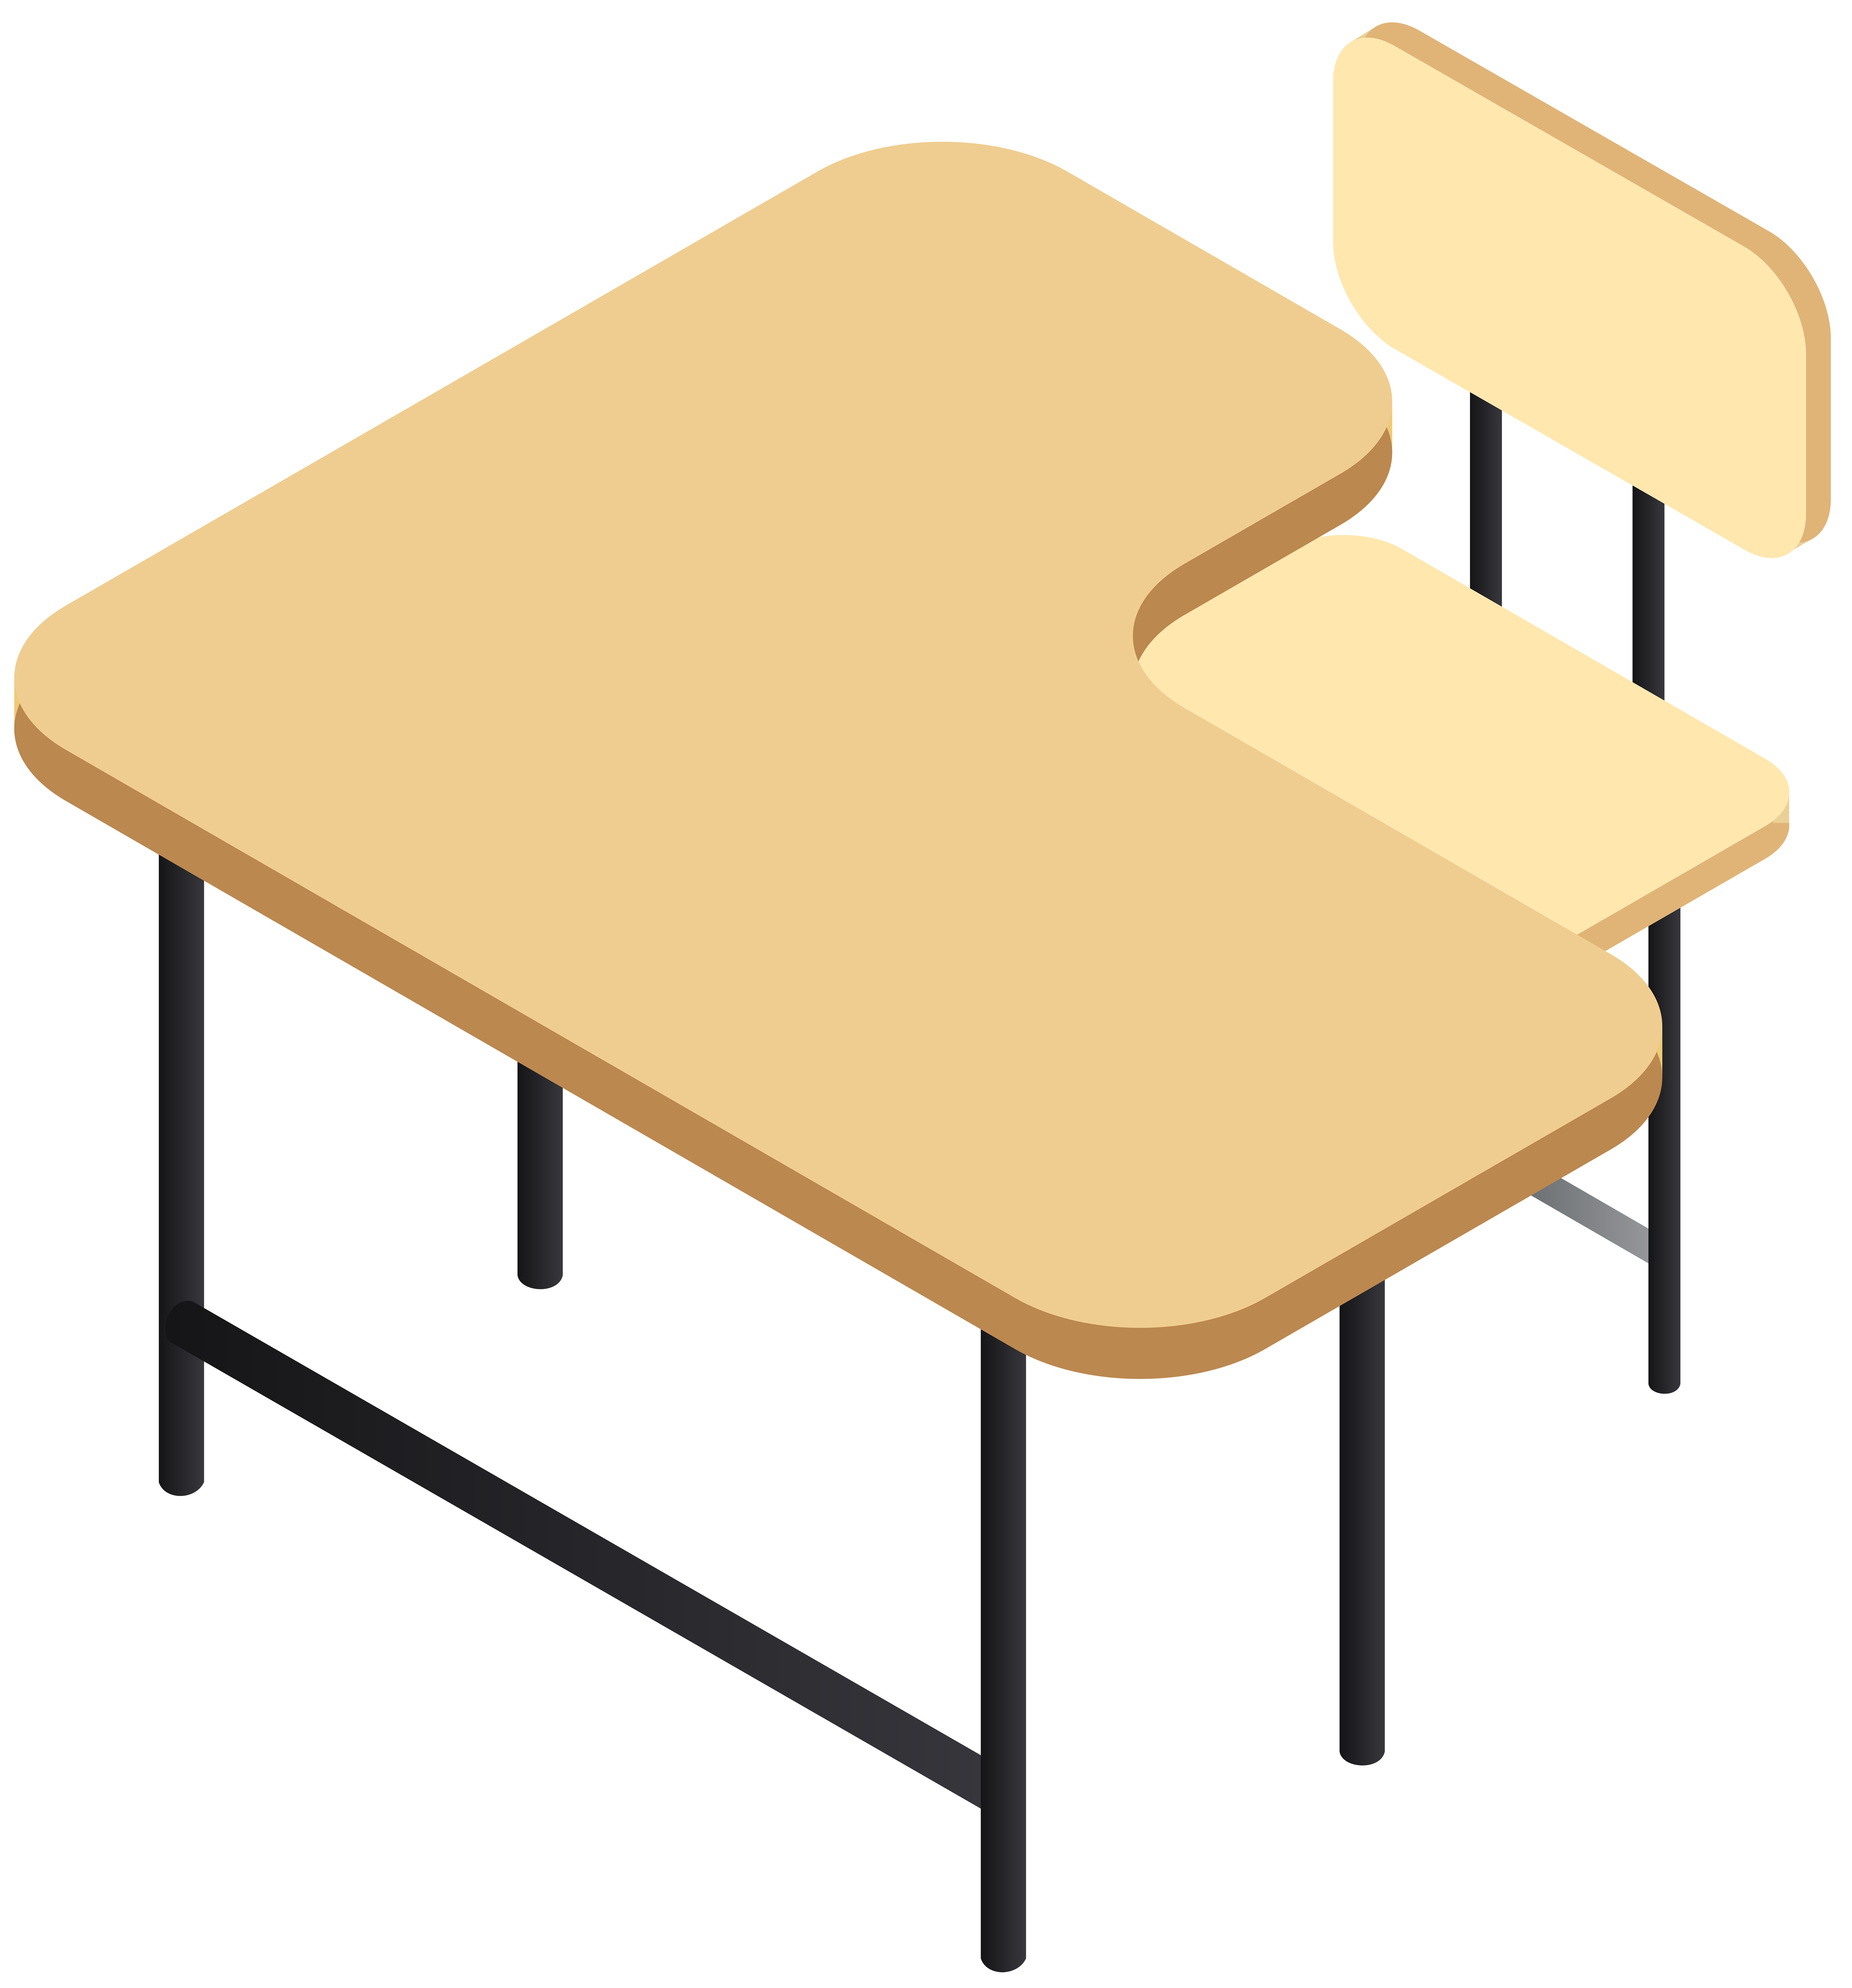 School Desk Png Clip Art Image Gallery Yopriceville High Quality Images And Transparent Png Free Clipart